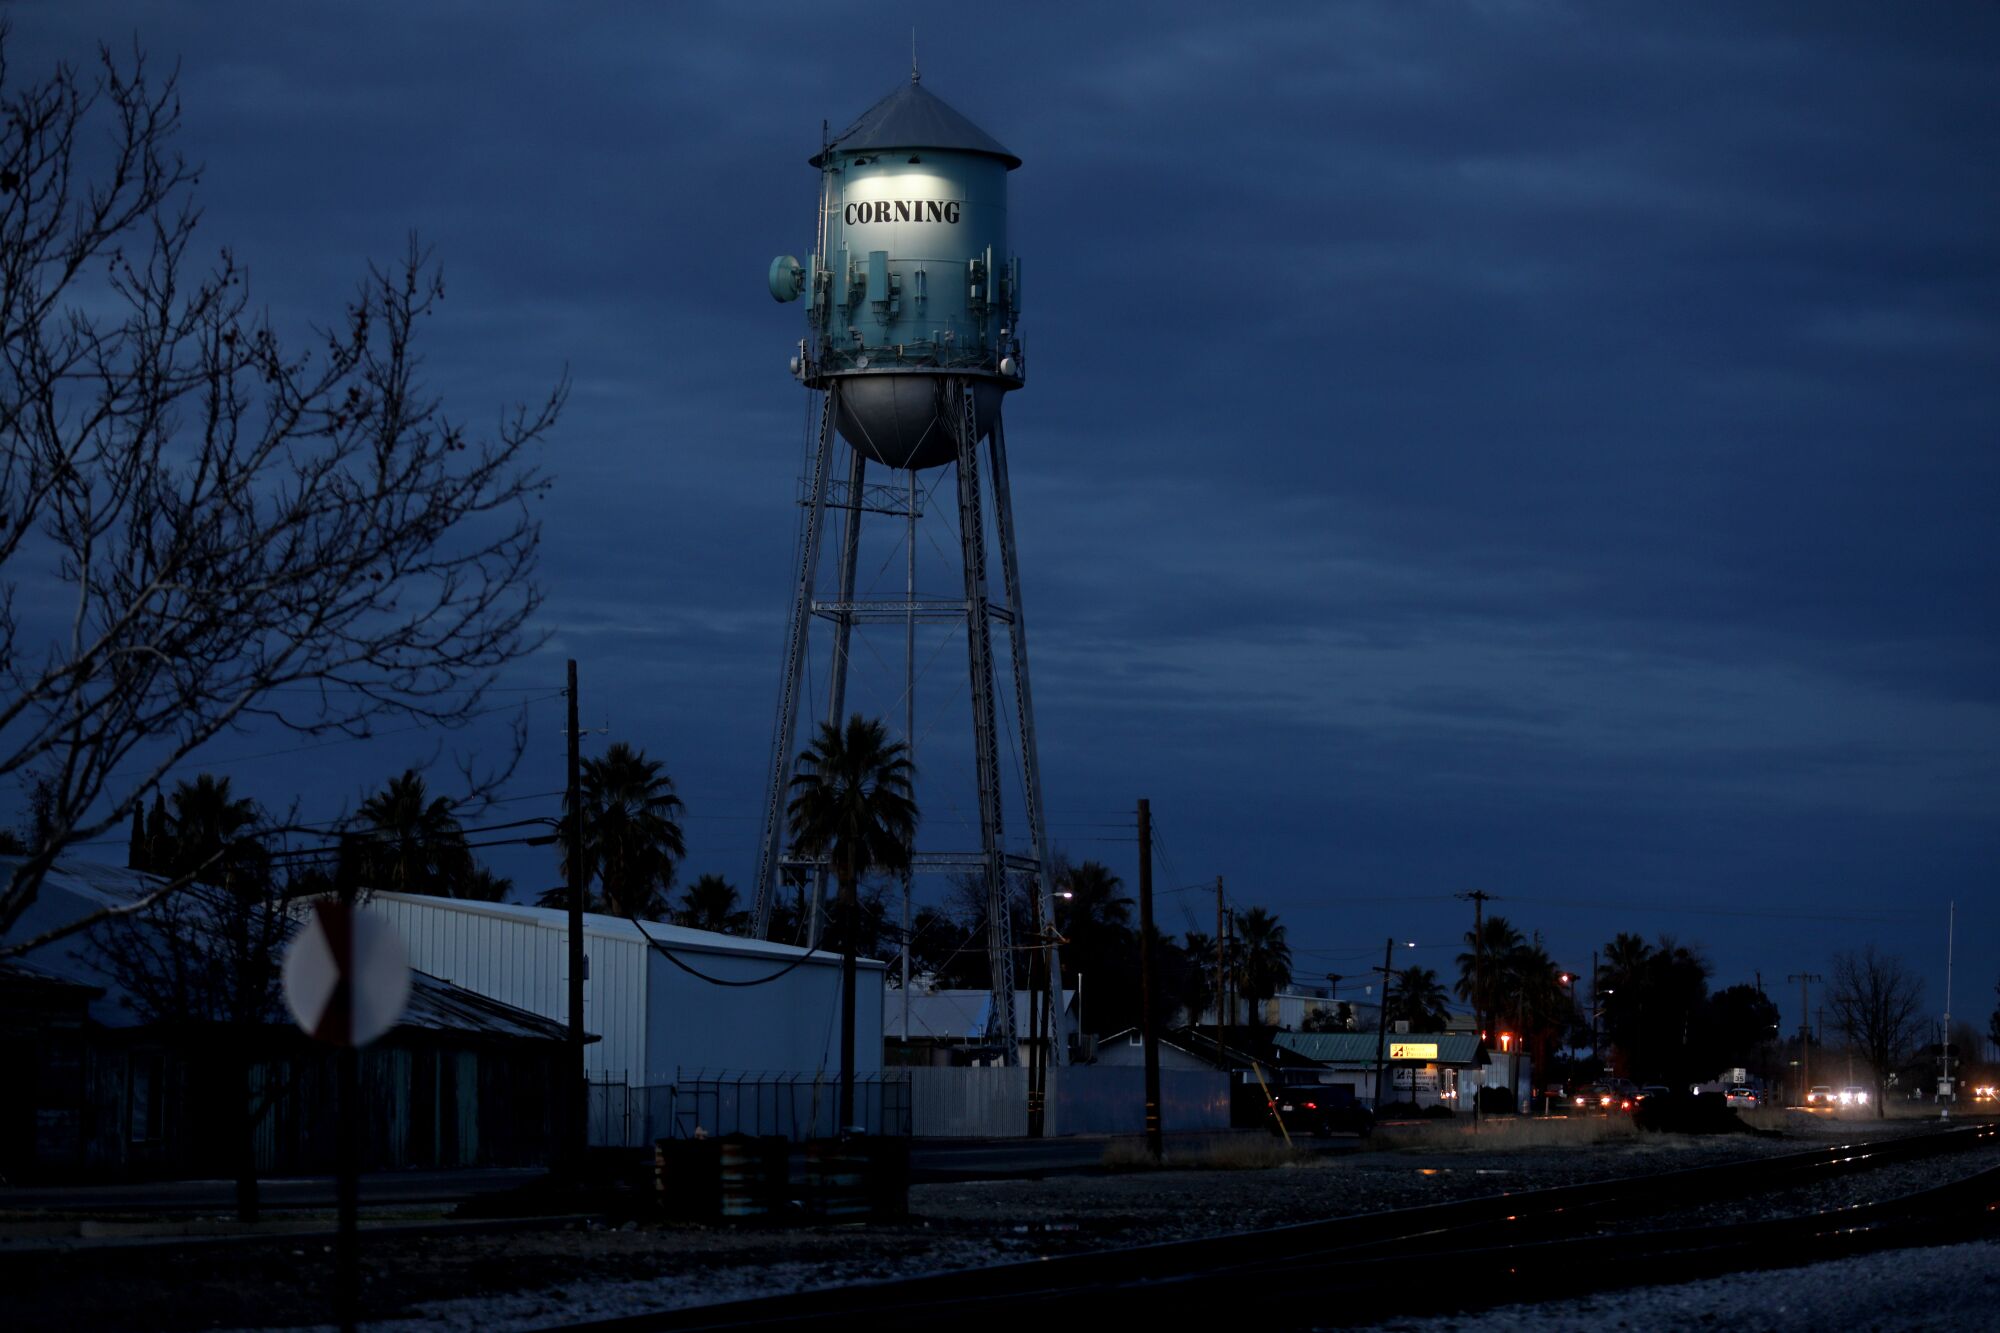 A water tower with the word Corning on it is seen at night